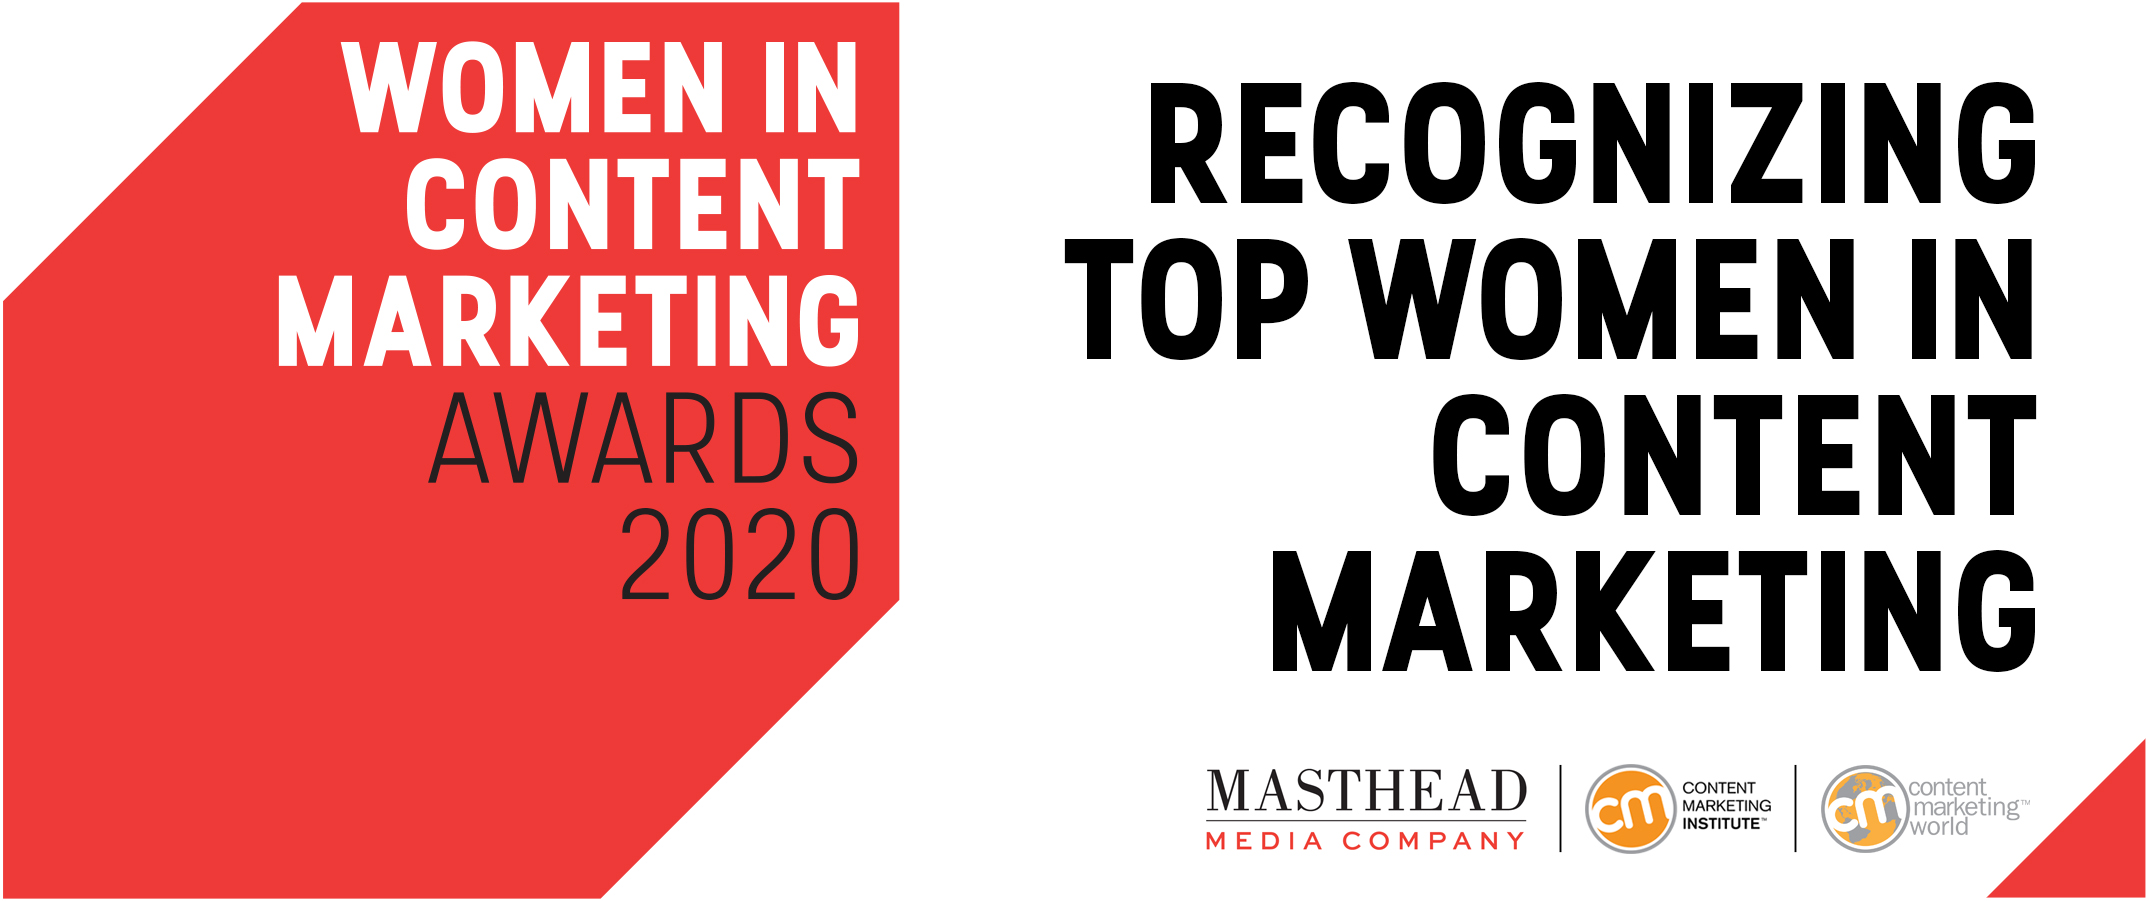 2020 WOMEN IN CONTENT MARKETING AWARDS: WINNERS ANNOUNCED